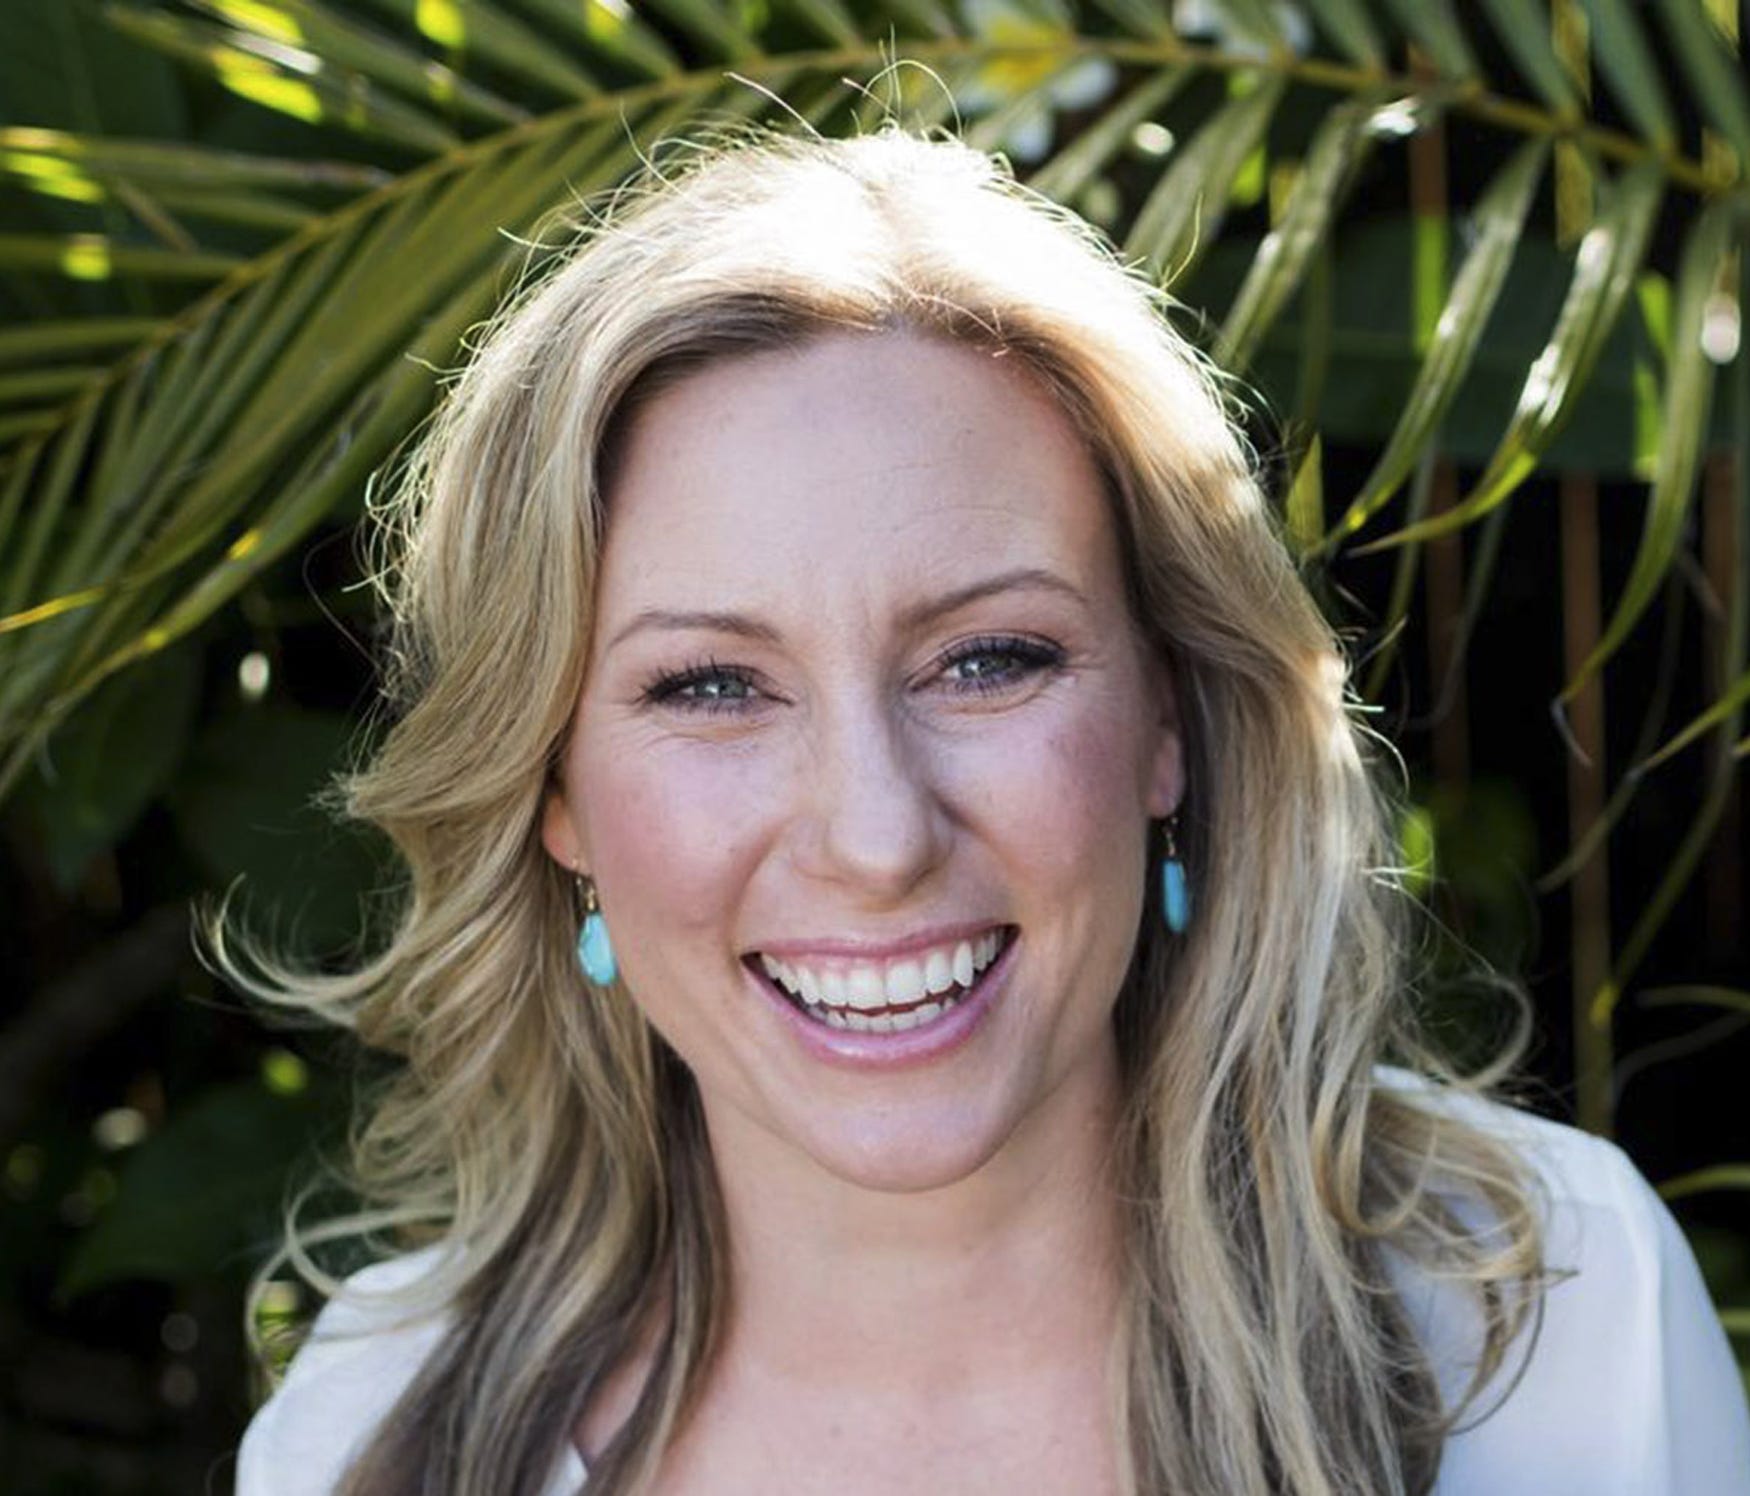 This undated photo provided by Stephen Govel shows Justine Damond, of Sydney, Australia, who was fatally shot by by police in Minneapolis on Saturday, July 15, 2017.